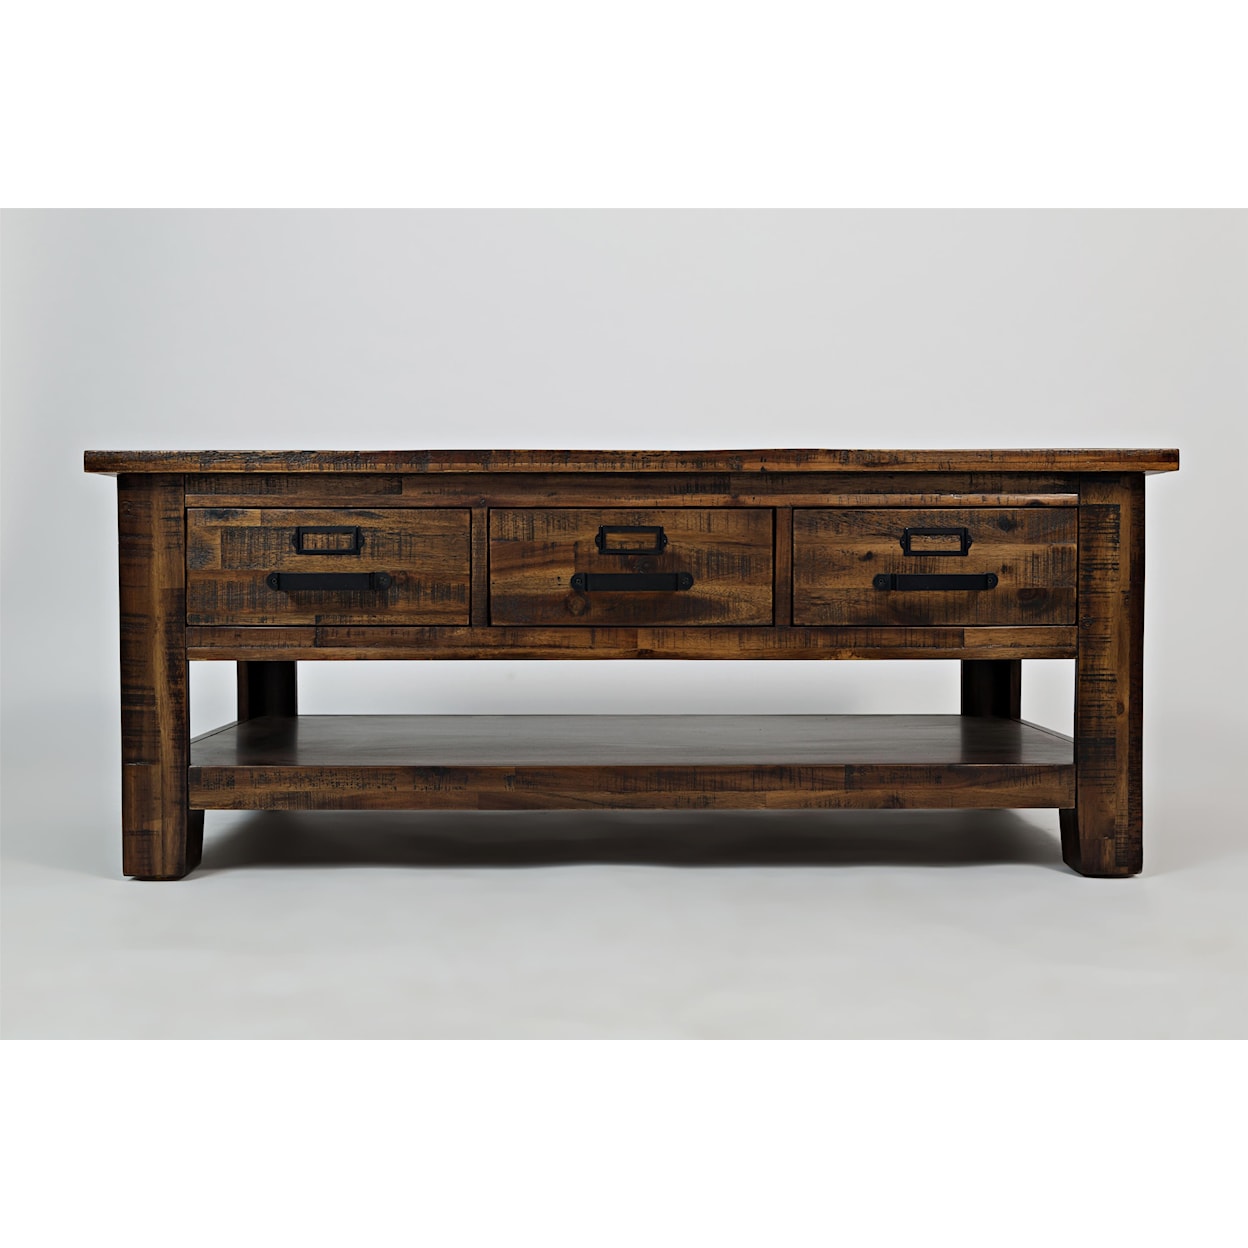 Jofran Cannon Valley Three Drawer Cocktail Table